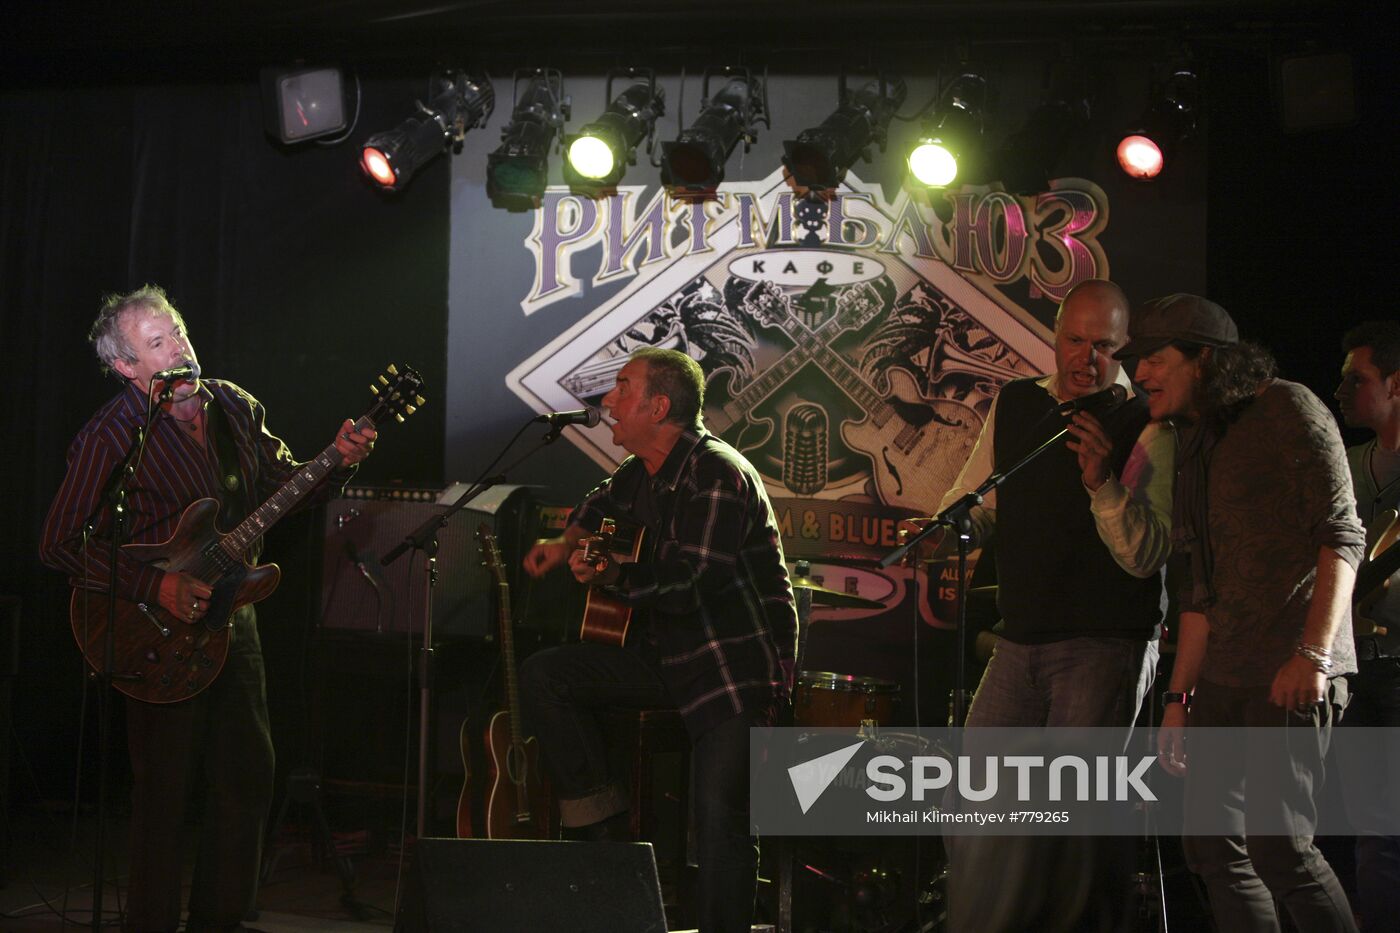 Russian rock musicians perform at Rhythm & Blues Cafe